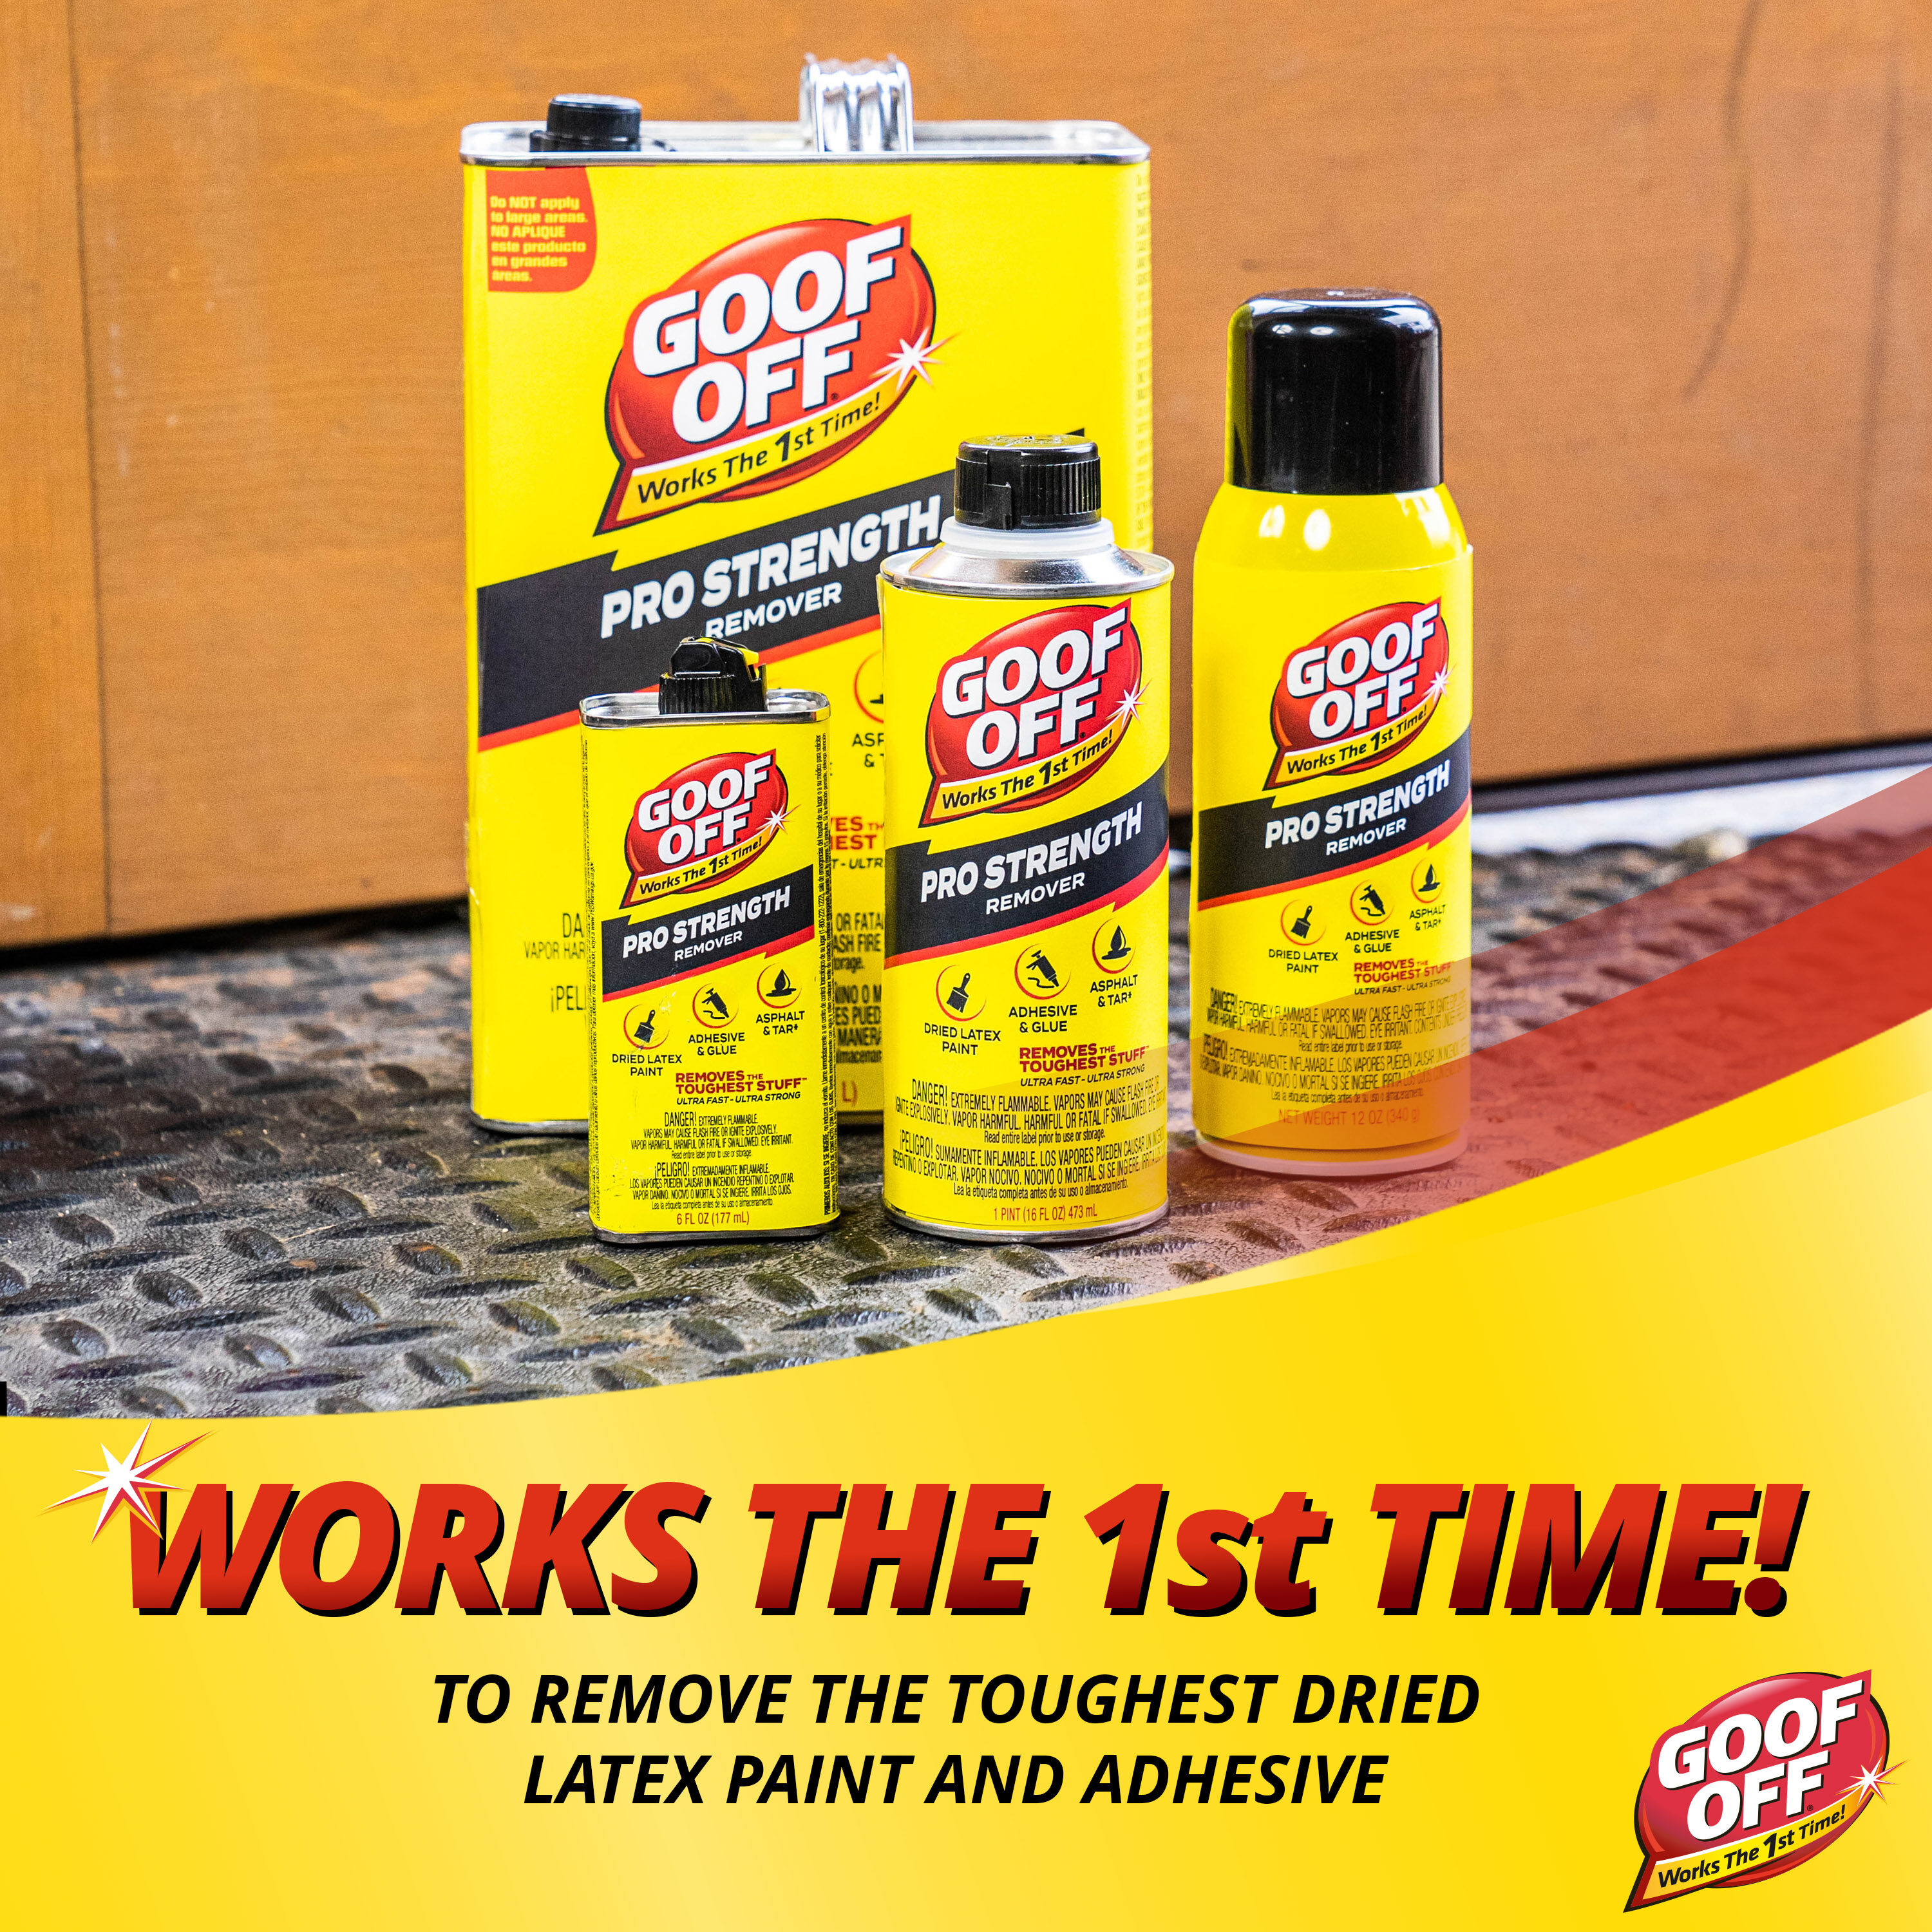 Goof Off 12-fl oz Adhesive Remover | Removes Latex Paint & Tough Adhesives  | Aerosol Spray | Works Faster & Better | For Baseboards, Wood, Metal